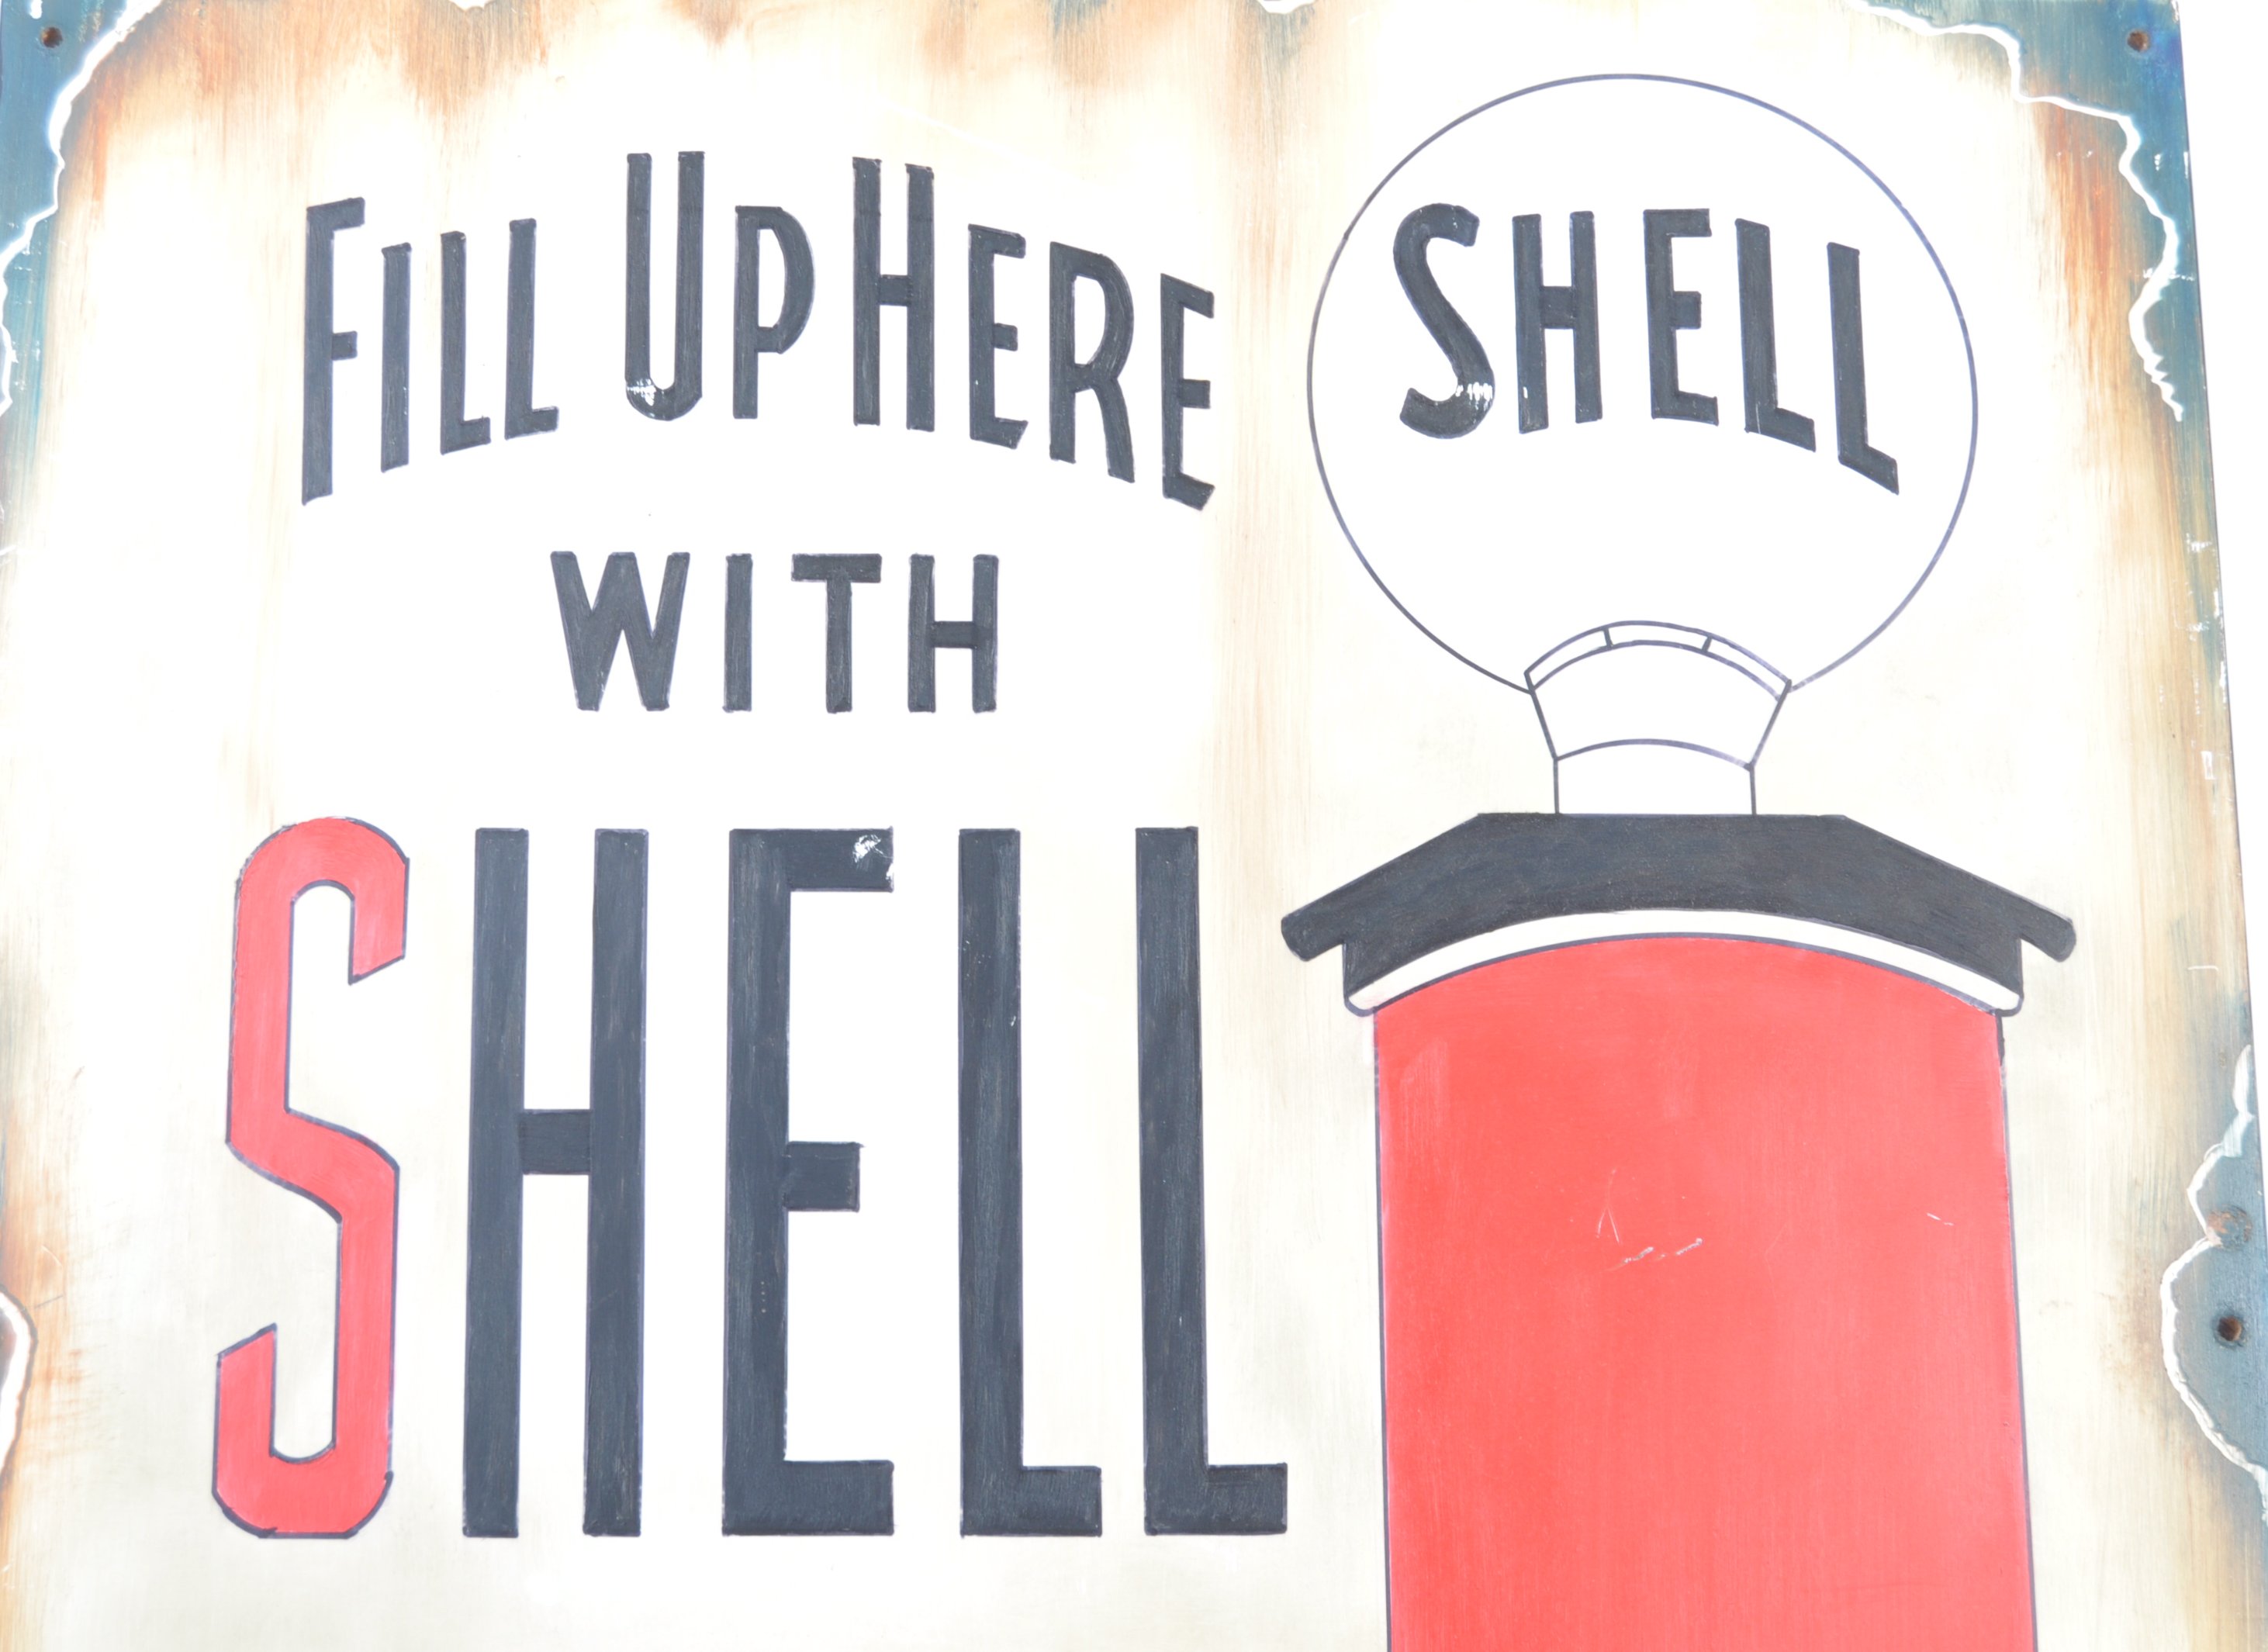 SHELL FROM THE PUMP - REPRODUCTION PAINTED ADVERTISING SIGN - Image 2 of 3